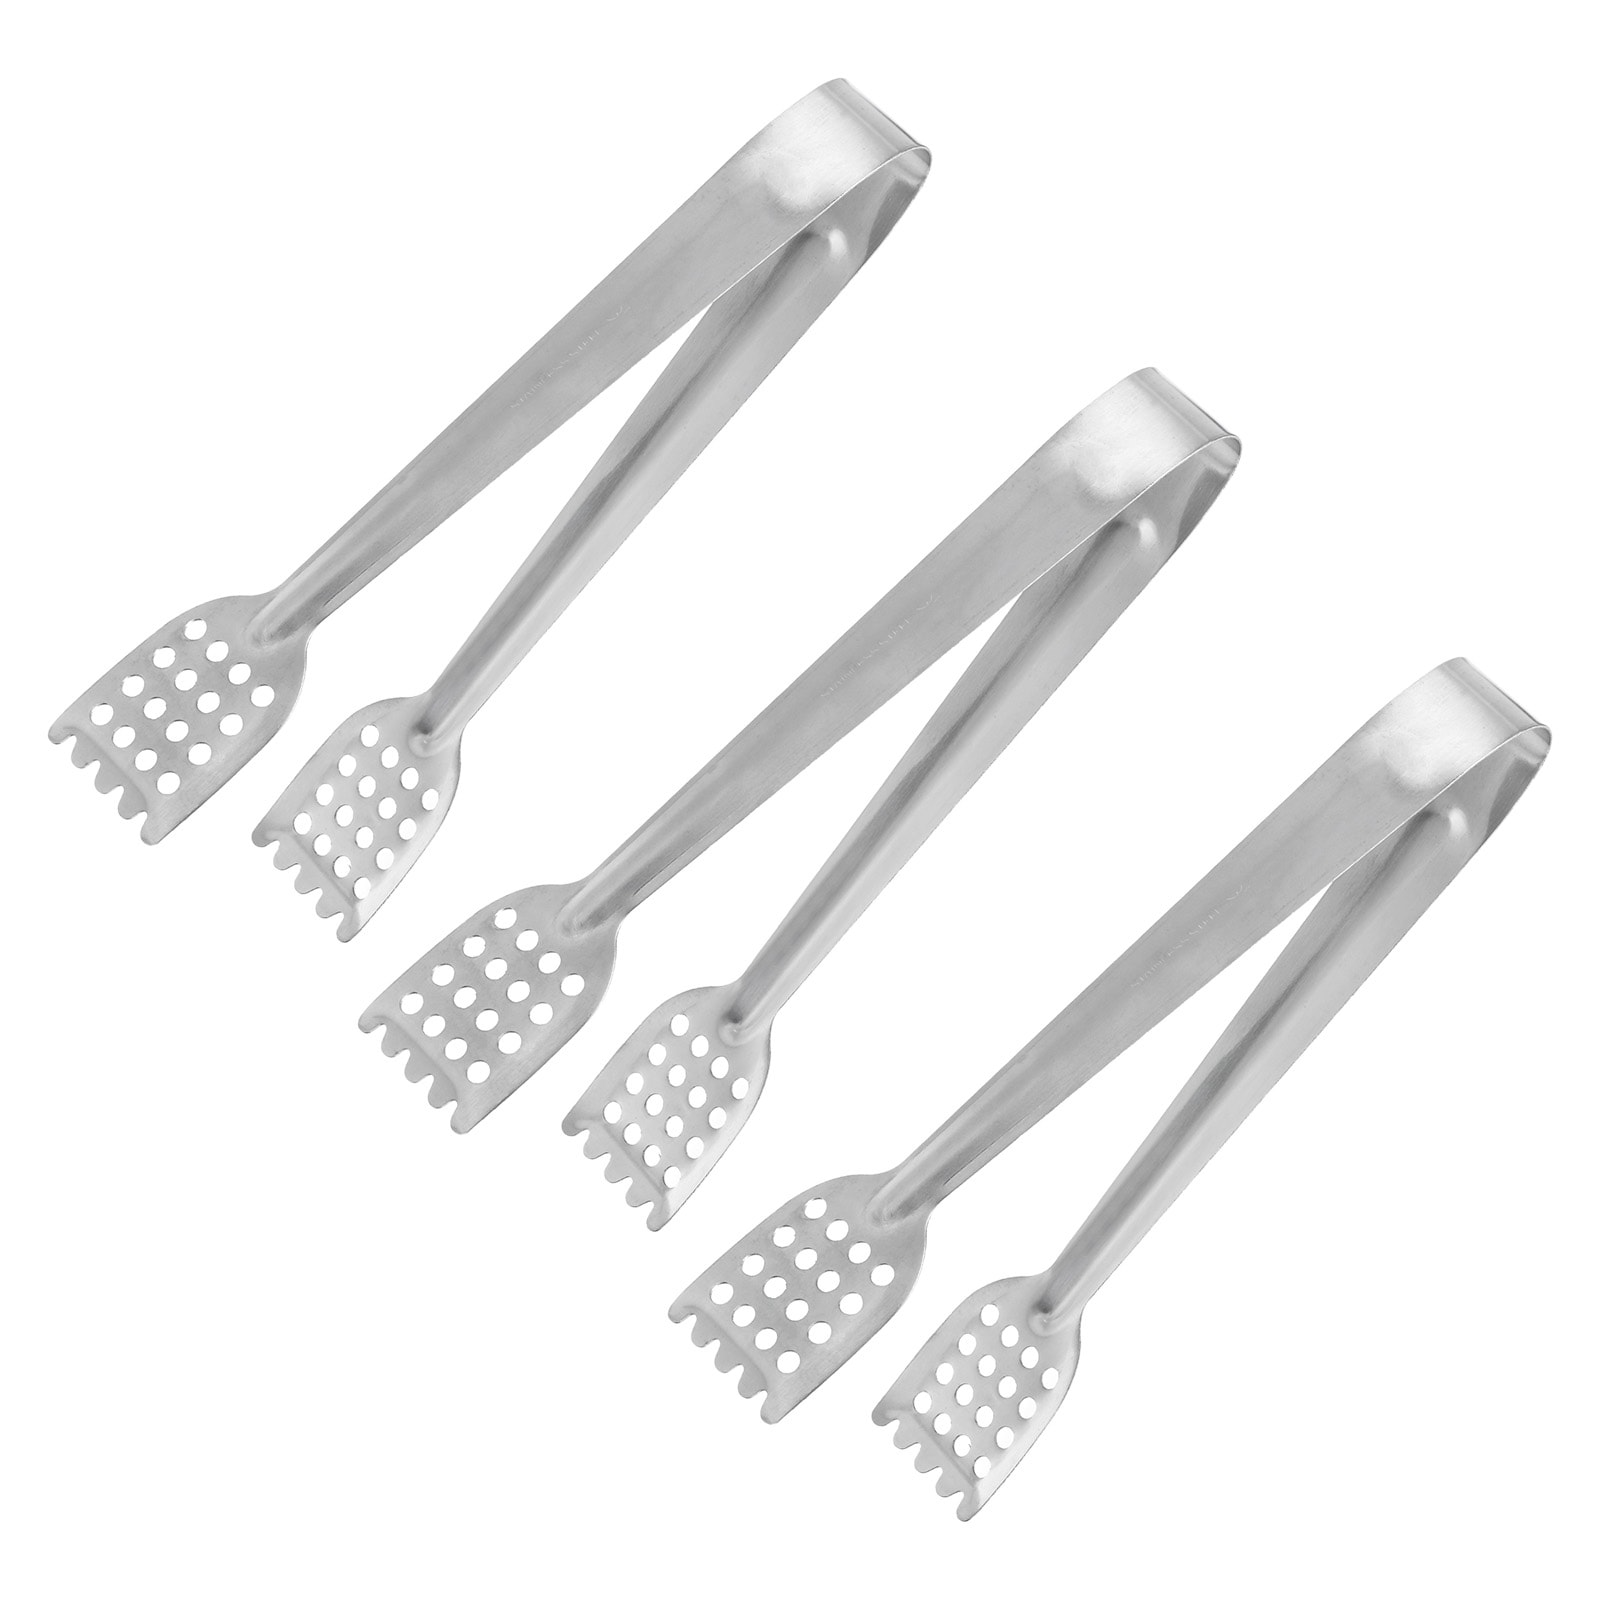 https://ak1.ostkcdn.com/images/products/is/images/direct/3db24443d296339d7701a18082aaa14800ef84b6/Serving-Tongs%2C-3pcs-6.5-Inch-Stainless-Steel-Ice-Tongs%2C-Mini-Sugar-Tong.jpg